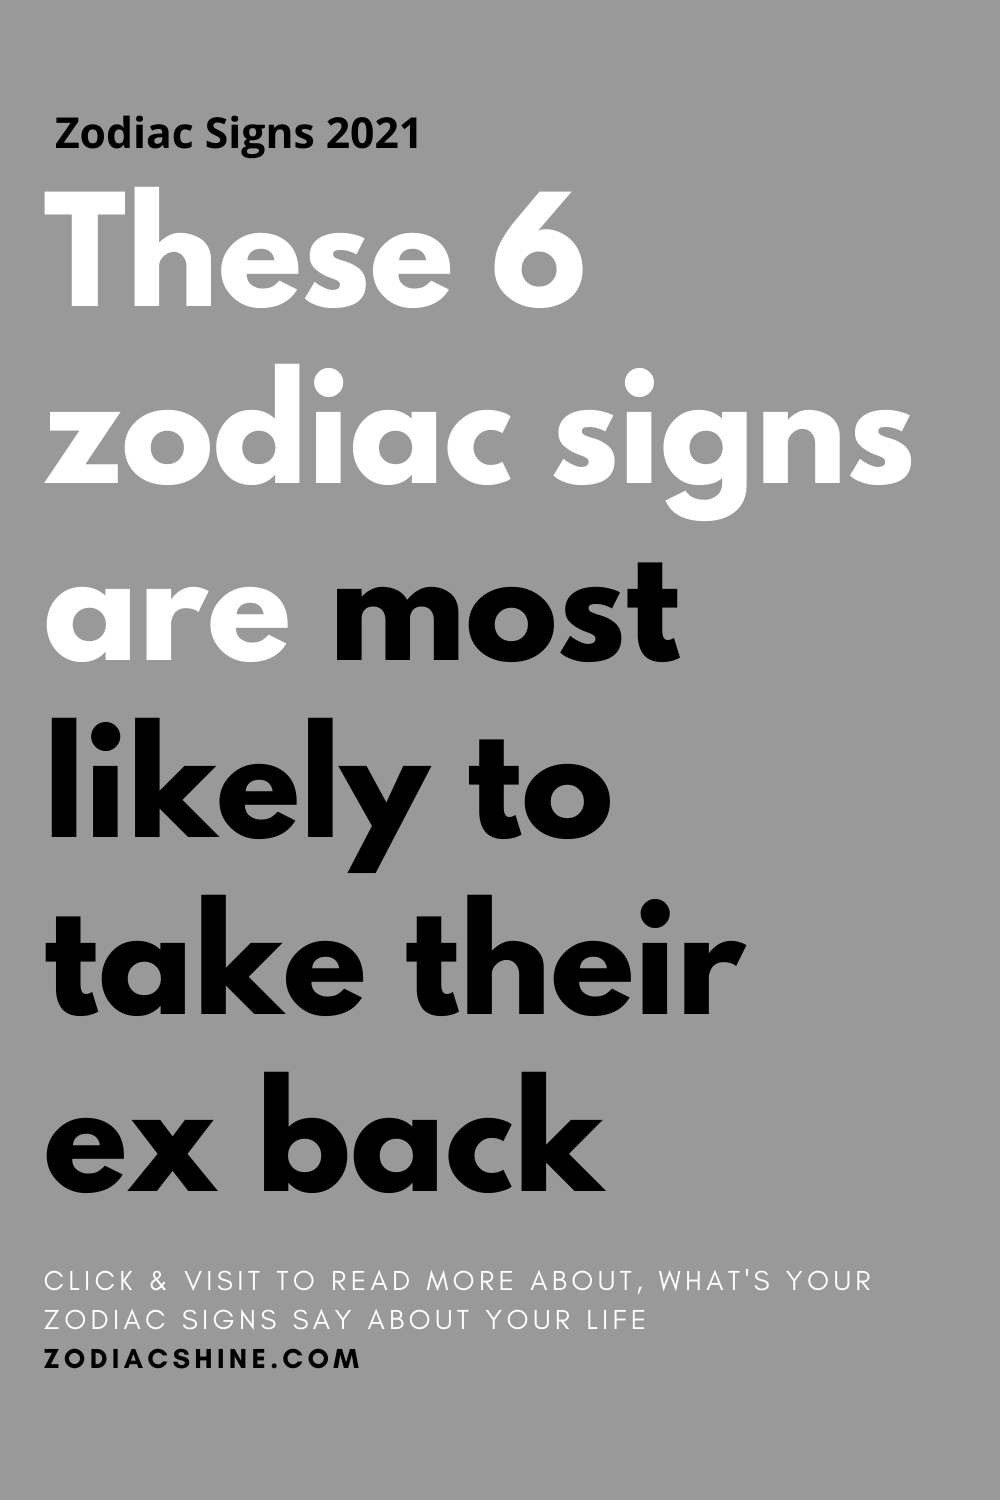 These 6 zodiac signs are most likely to take their ex back